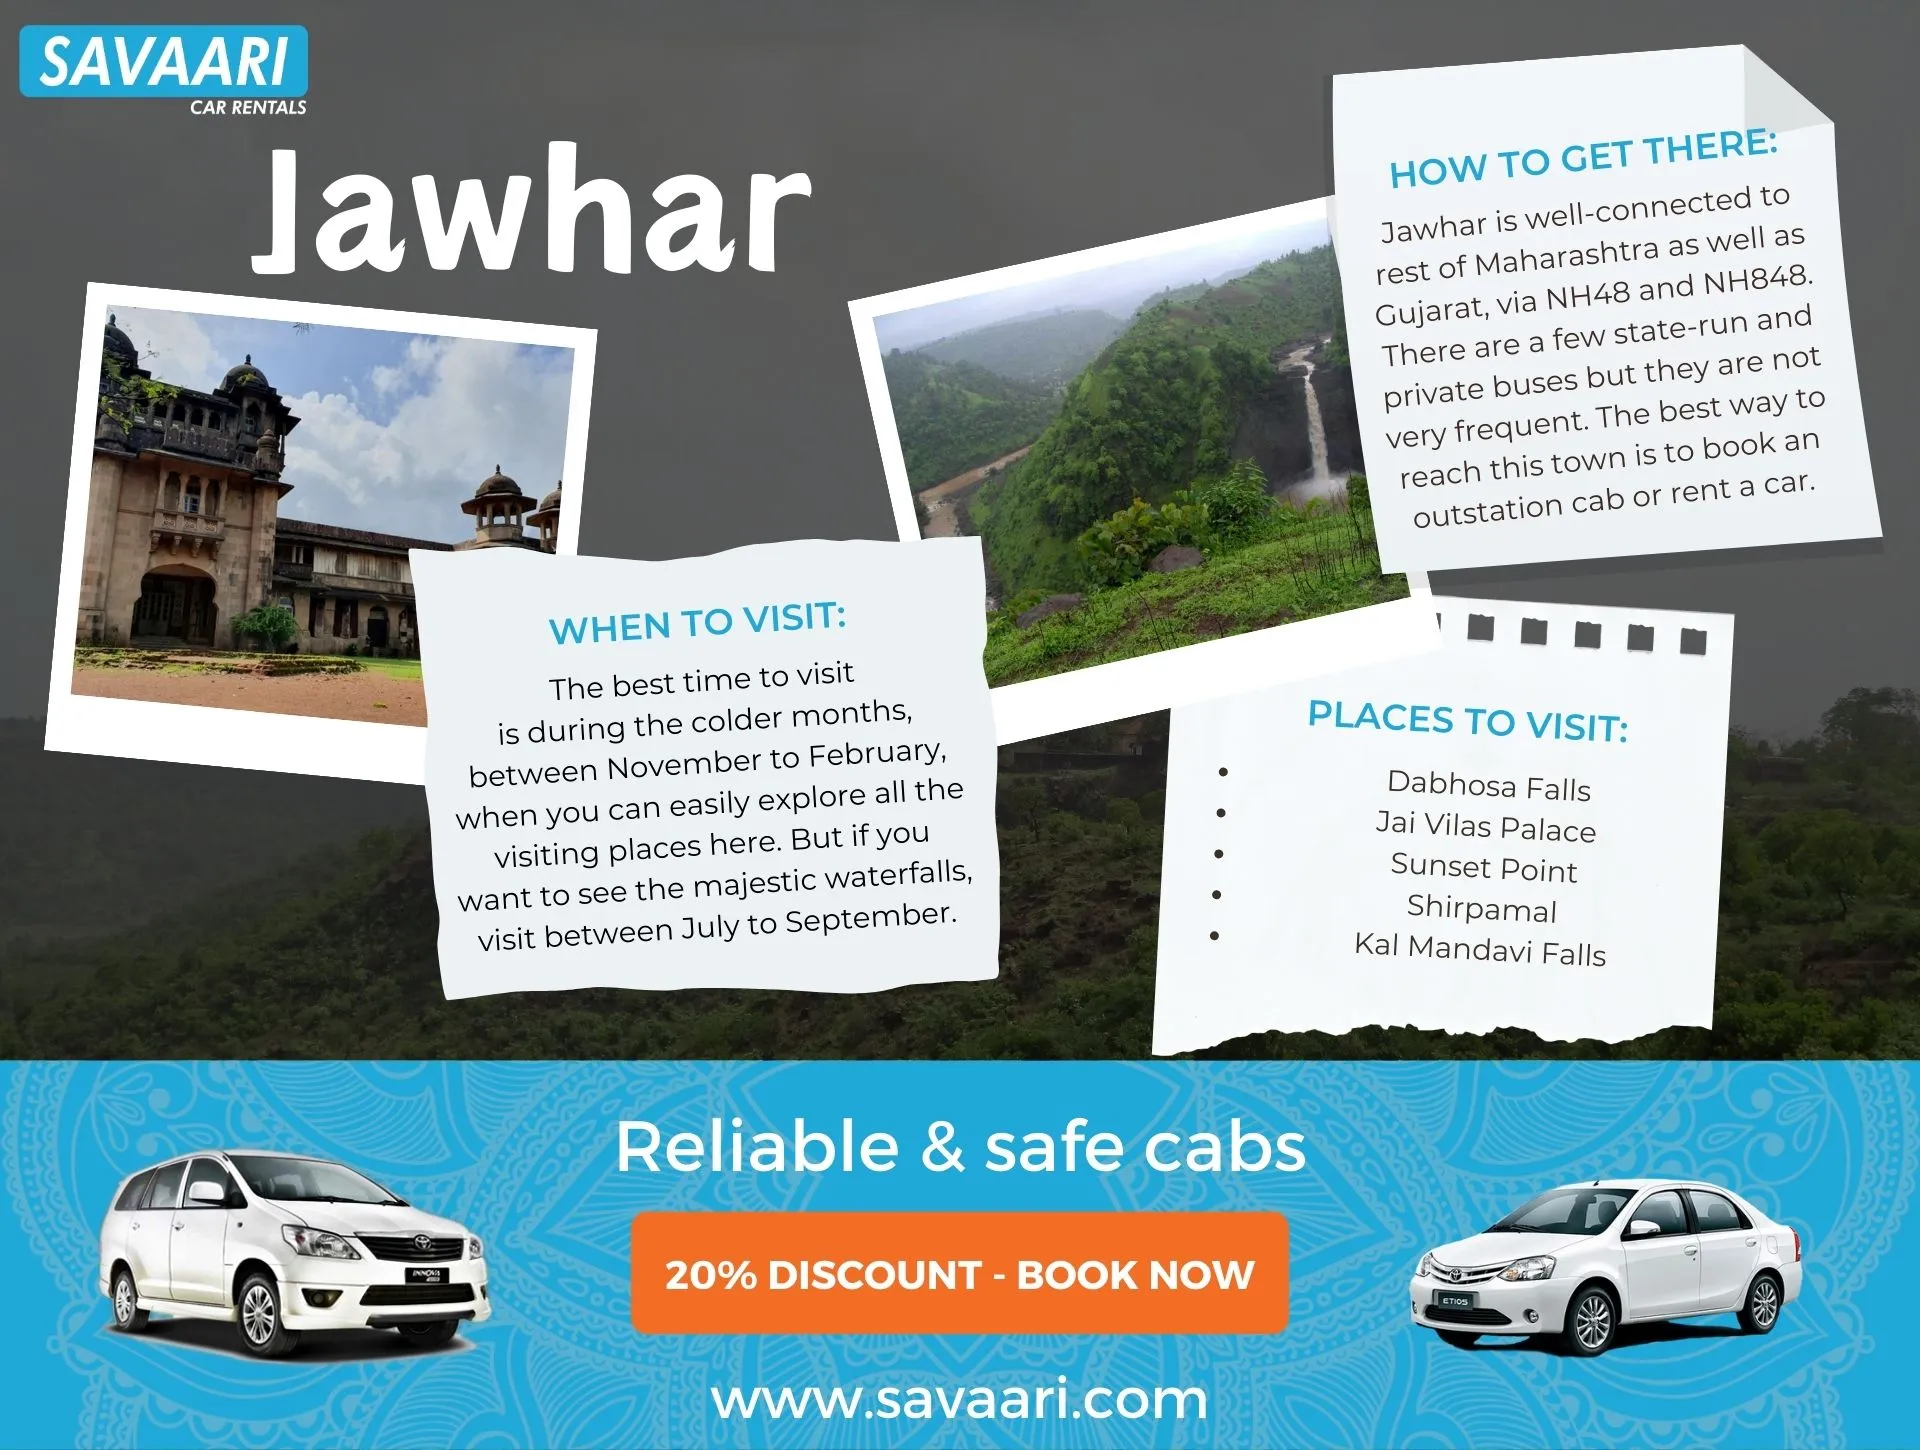 Things to do in Jawhar